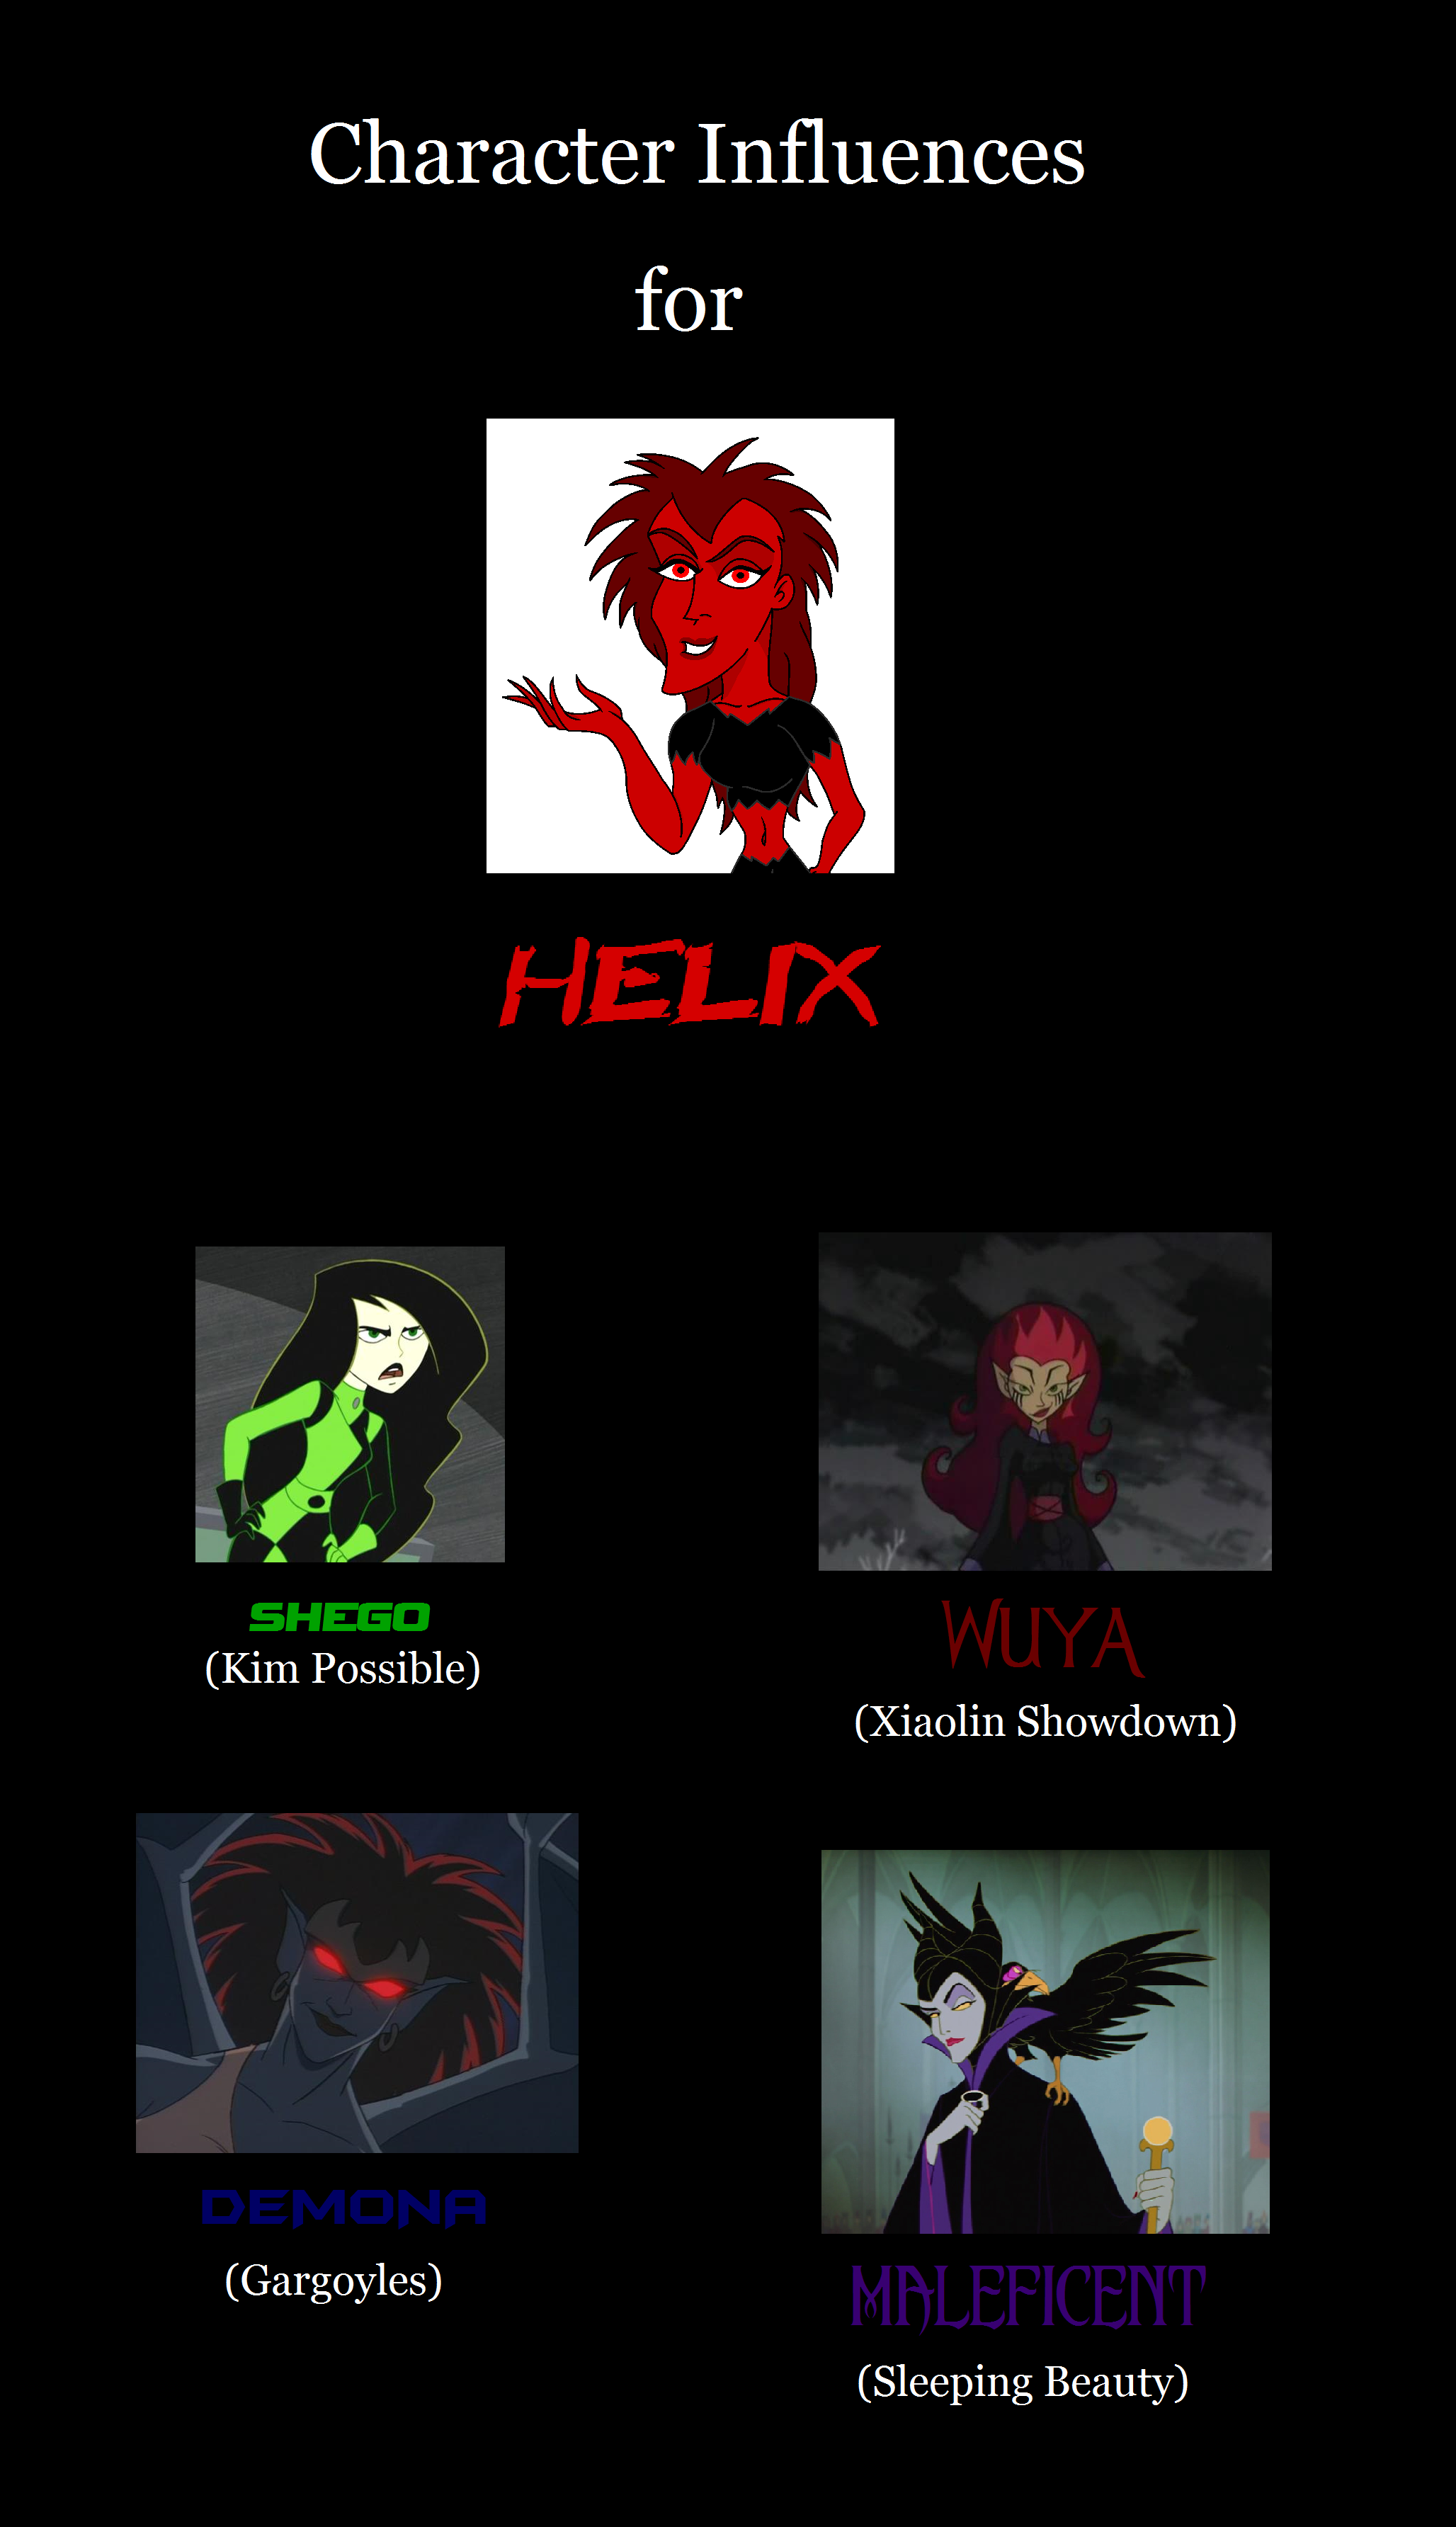 Character Influences for Helix